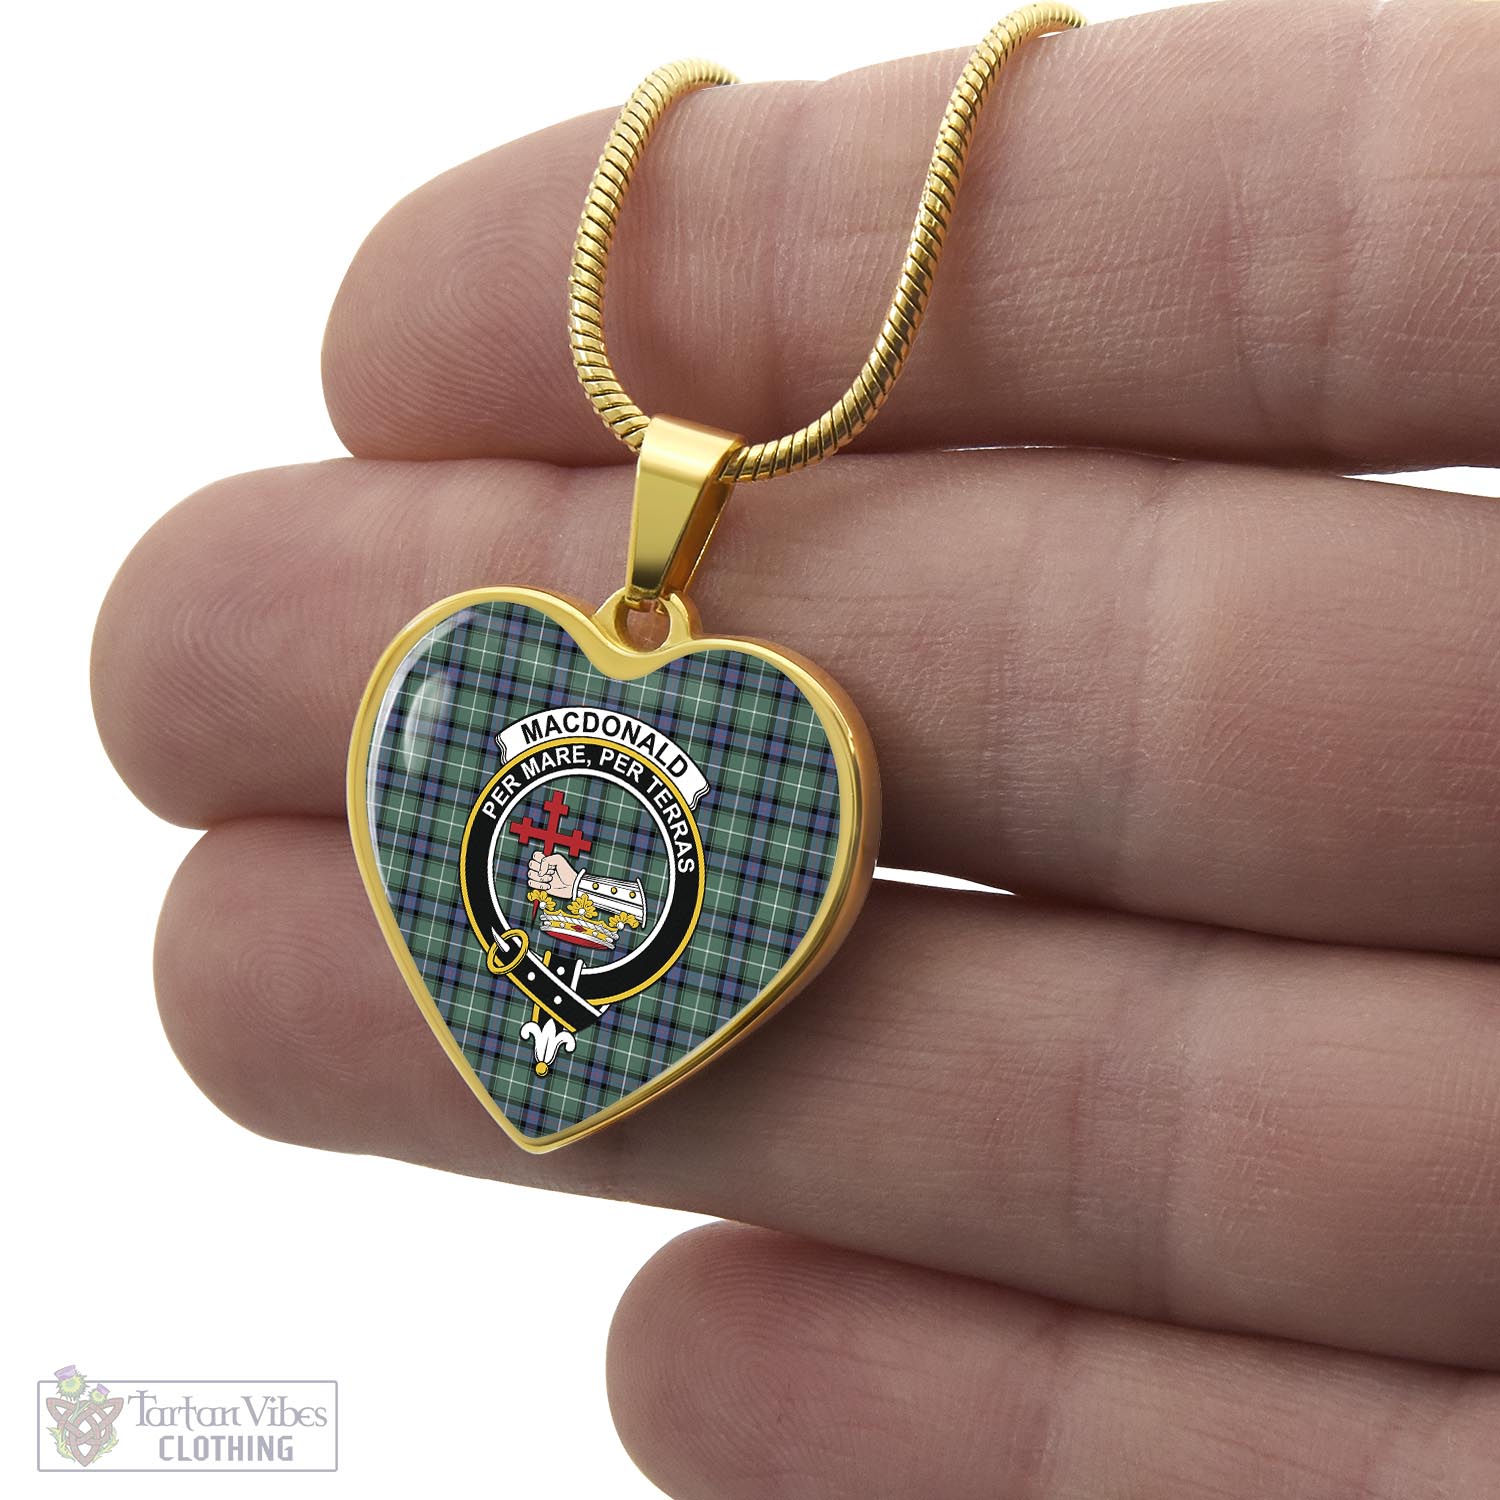 Tartan Vibes Clothing MacDonald of the Isles Hunting Ancient Tartan Heart Necklace with Family Crest